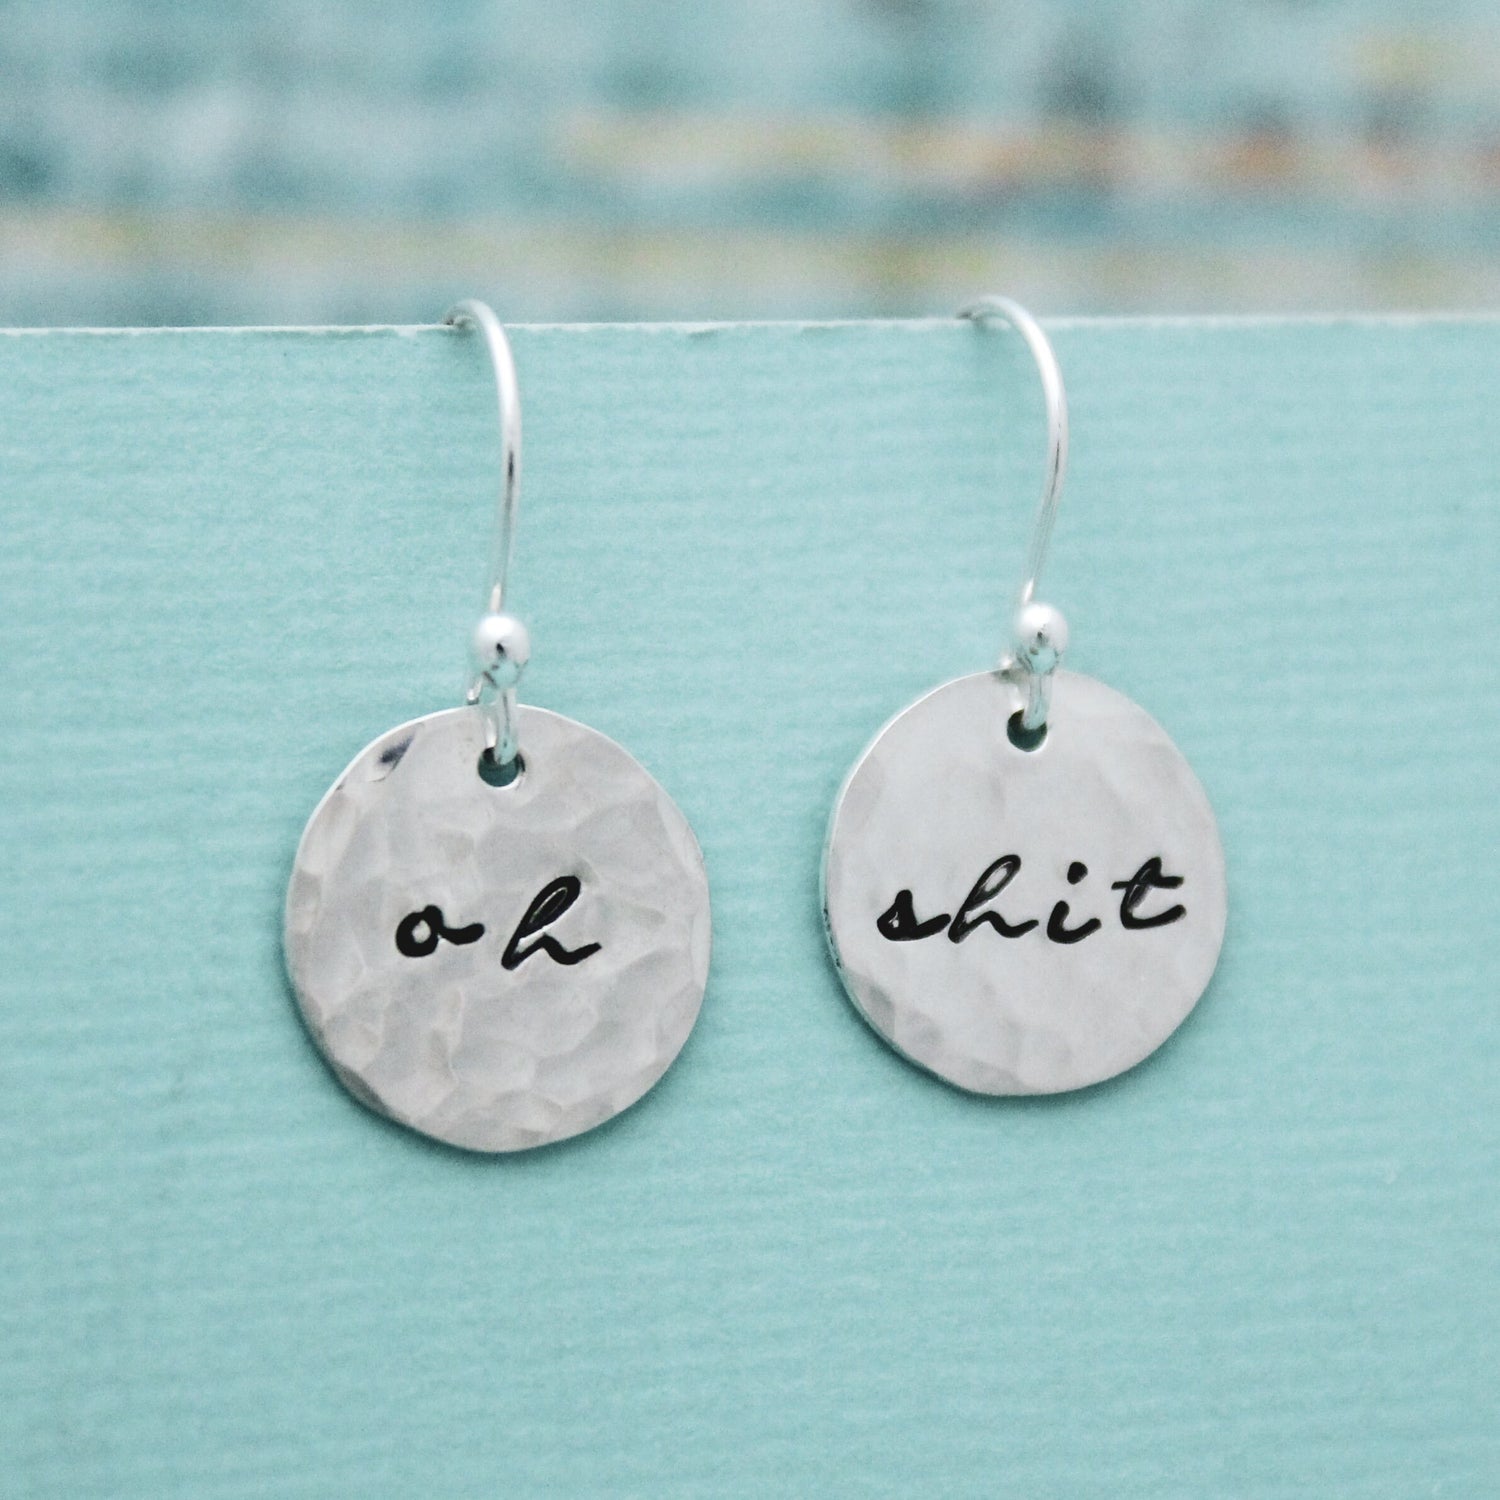 OH Shit Sterling Silver Earrings, Shit Jewelry, Hand Stamped Personalized Oh Shit Earrings, Fun Funky Oh Shit Jewelry Expletive Gift for Her